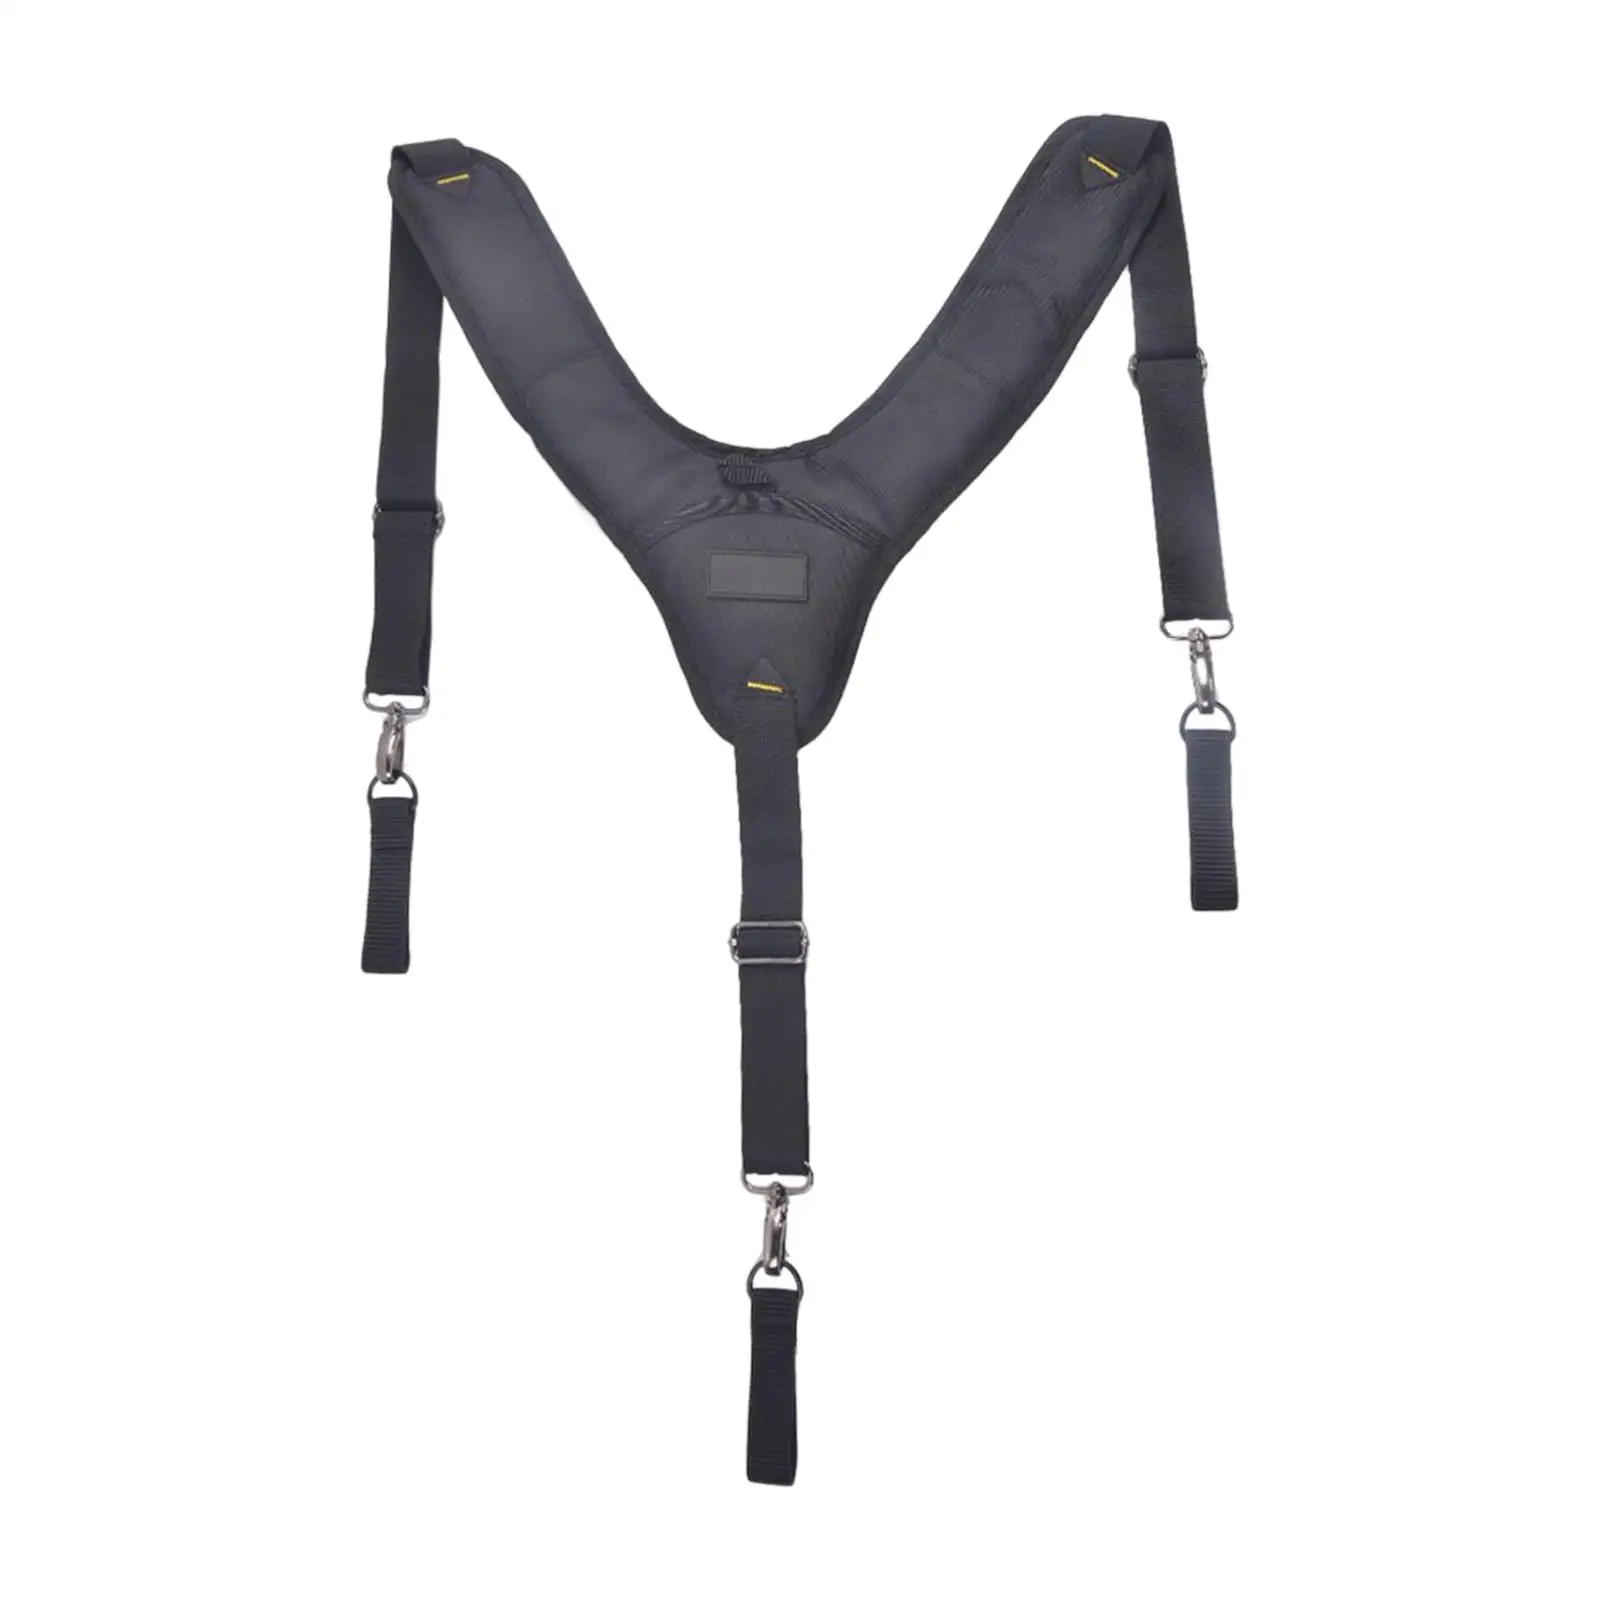 Work Suspender Cushioned Padding with 3 Pcs Suspender Loop Even Weight Distribution Tool Belt Suspenders for Framers Electrician